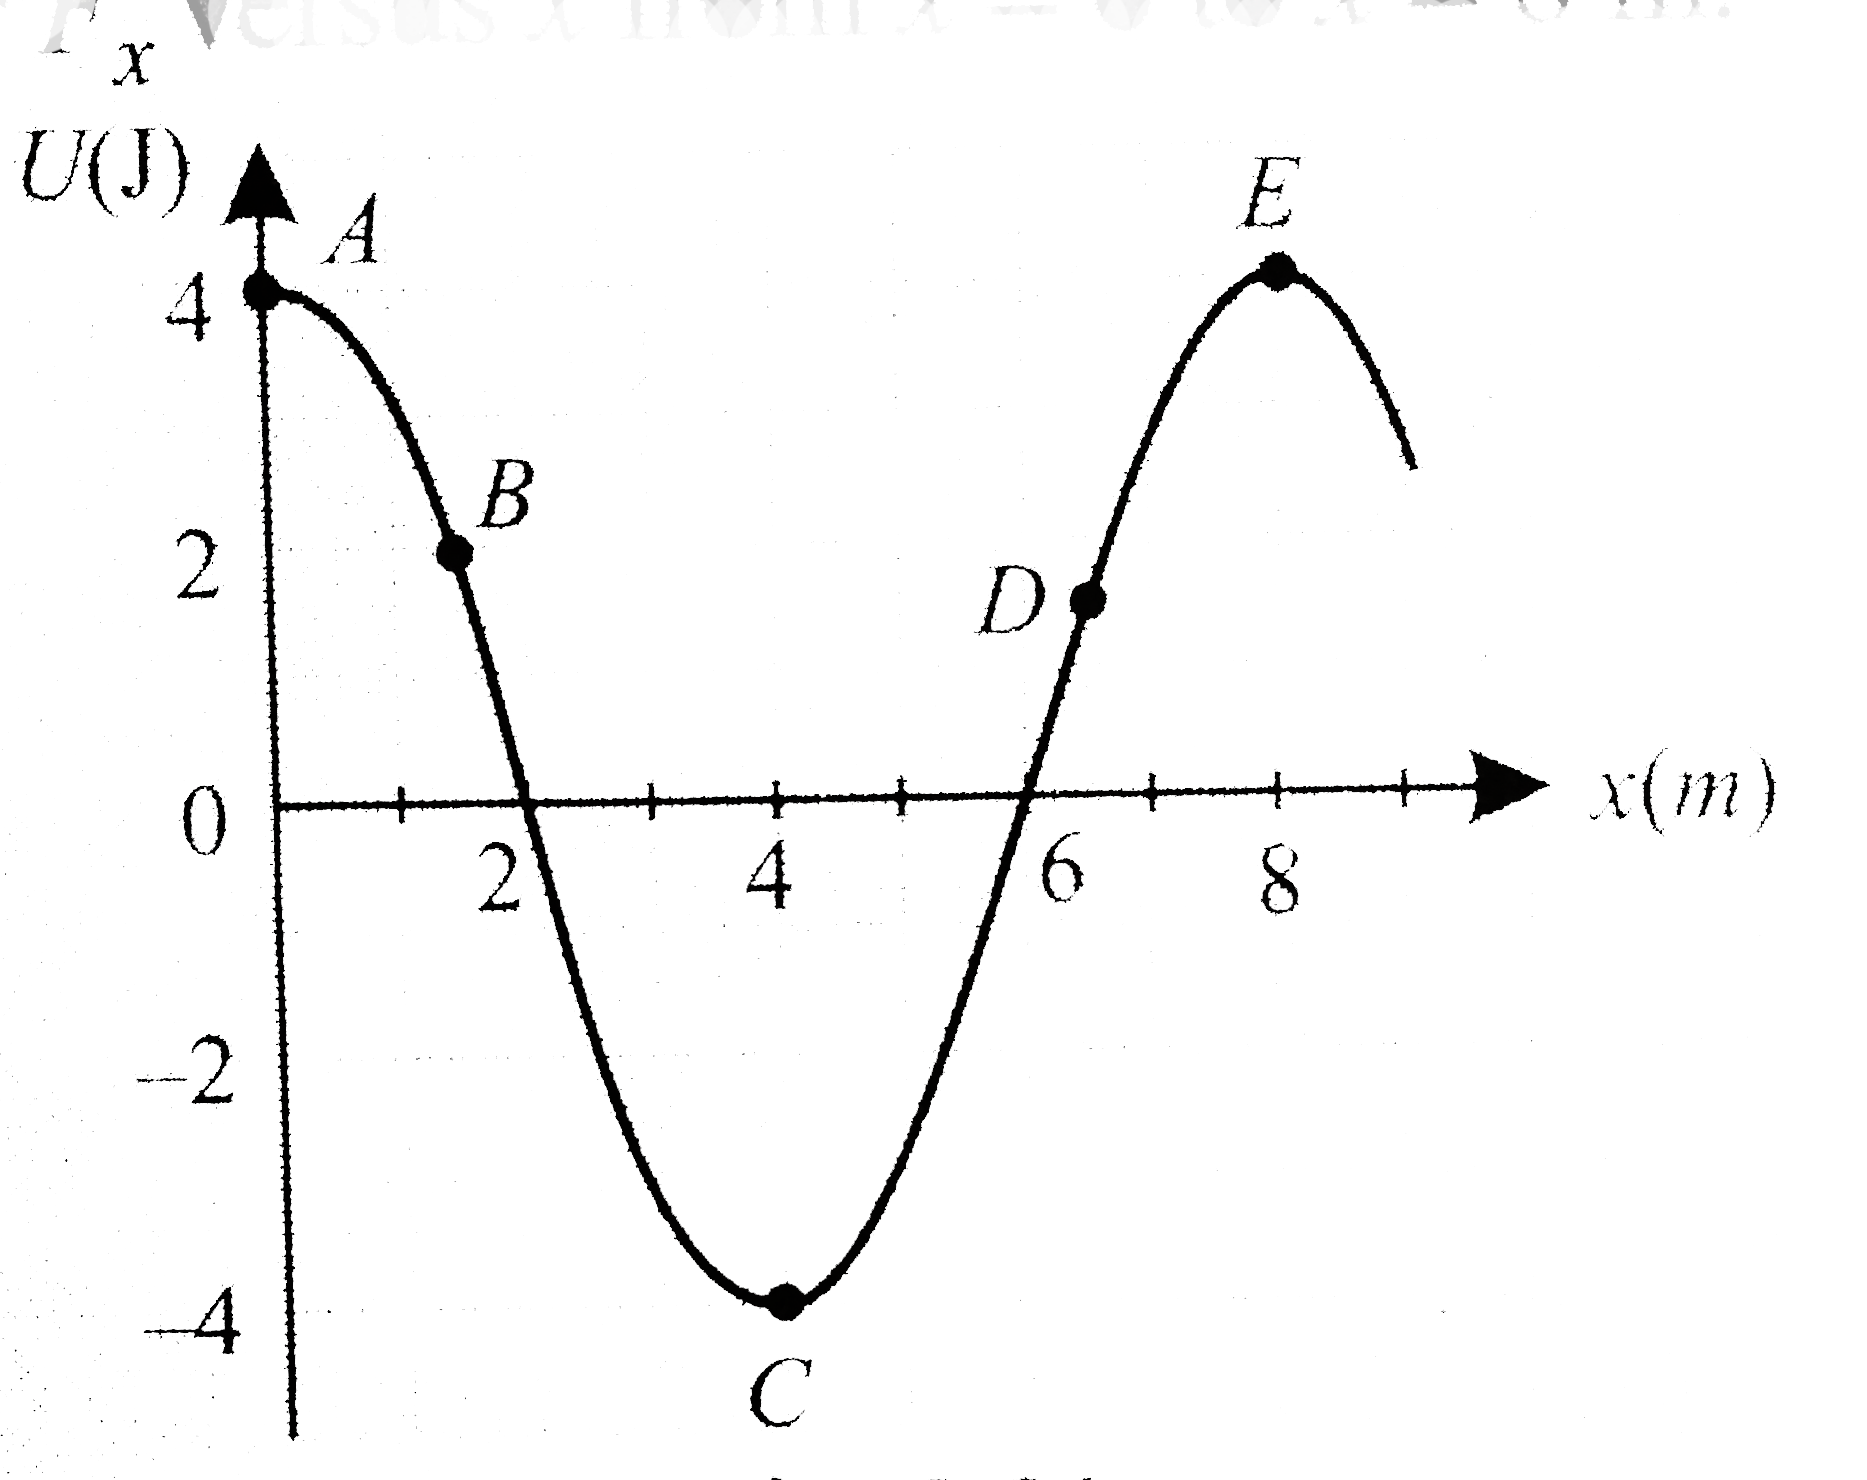 For the potential energy curve shown in figure.   (a) Determine whether the force Fx is positive, negative, or zero at the five points indicated, (b) Indicate points of stable, unstable, and neutral equilibrium, (c) Sketch the curve for Fx versus x from x=0 to x=8m.